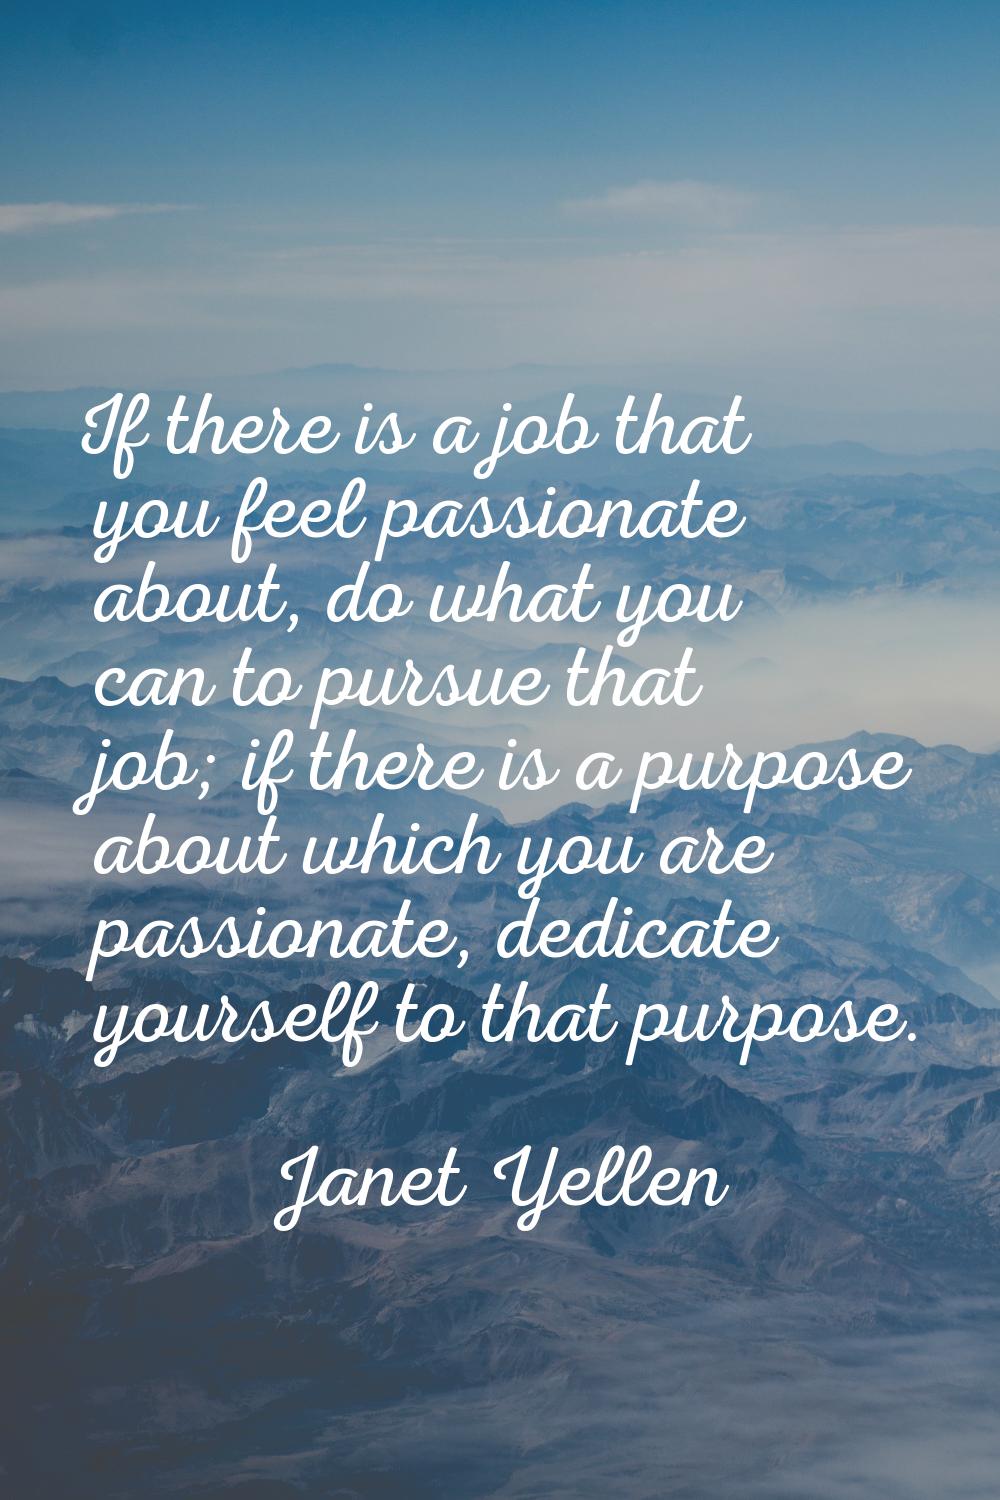 If there is a job that you feel passionate about, do what you can to pursue that job; if there is a